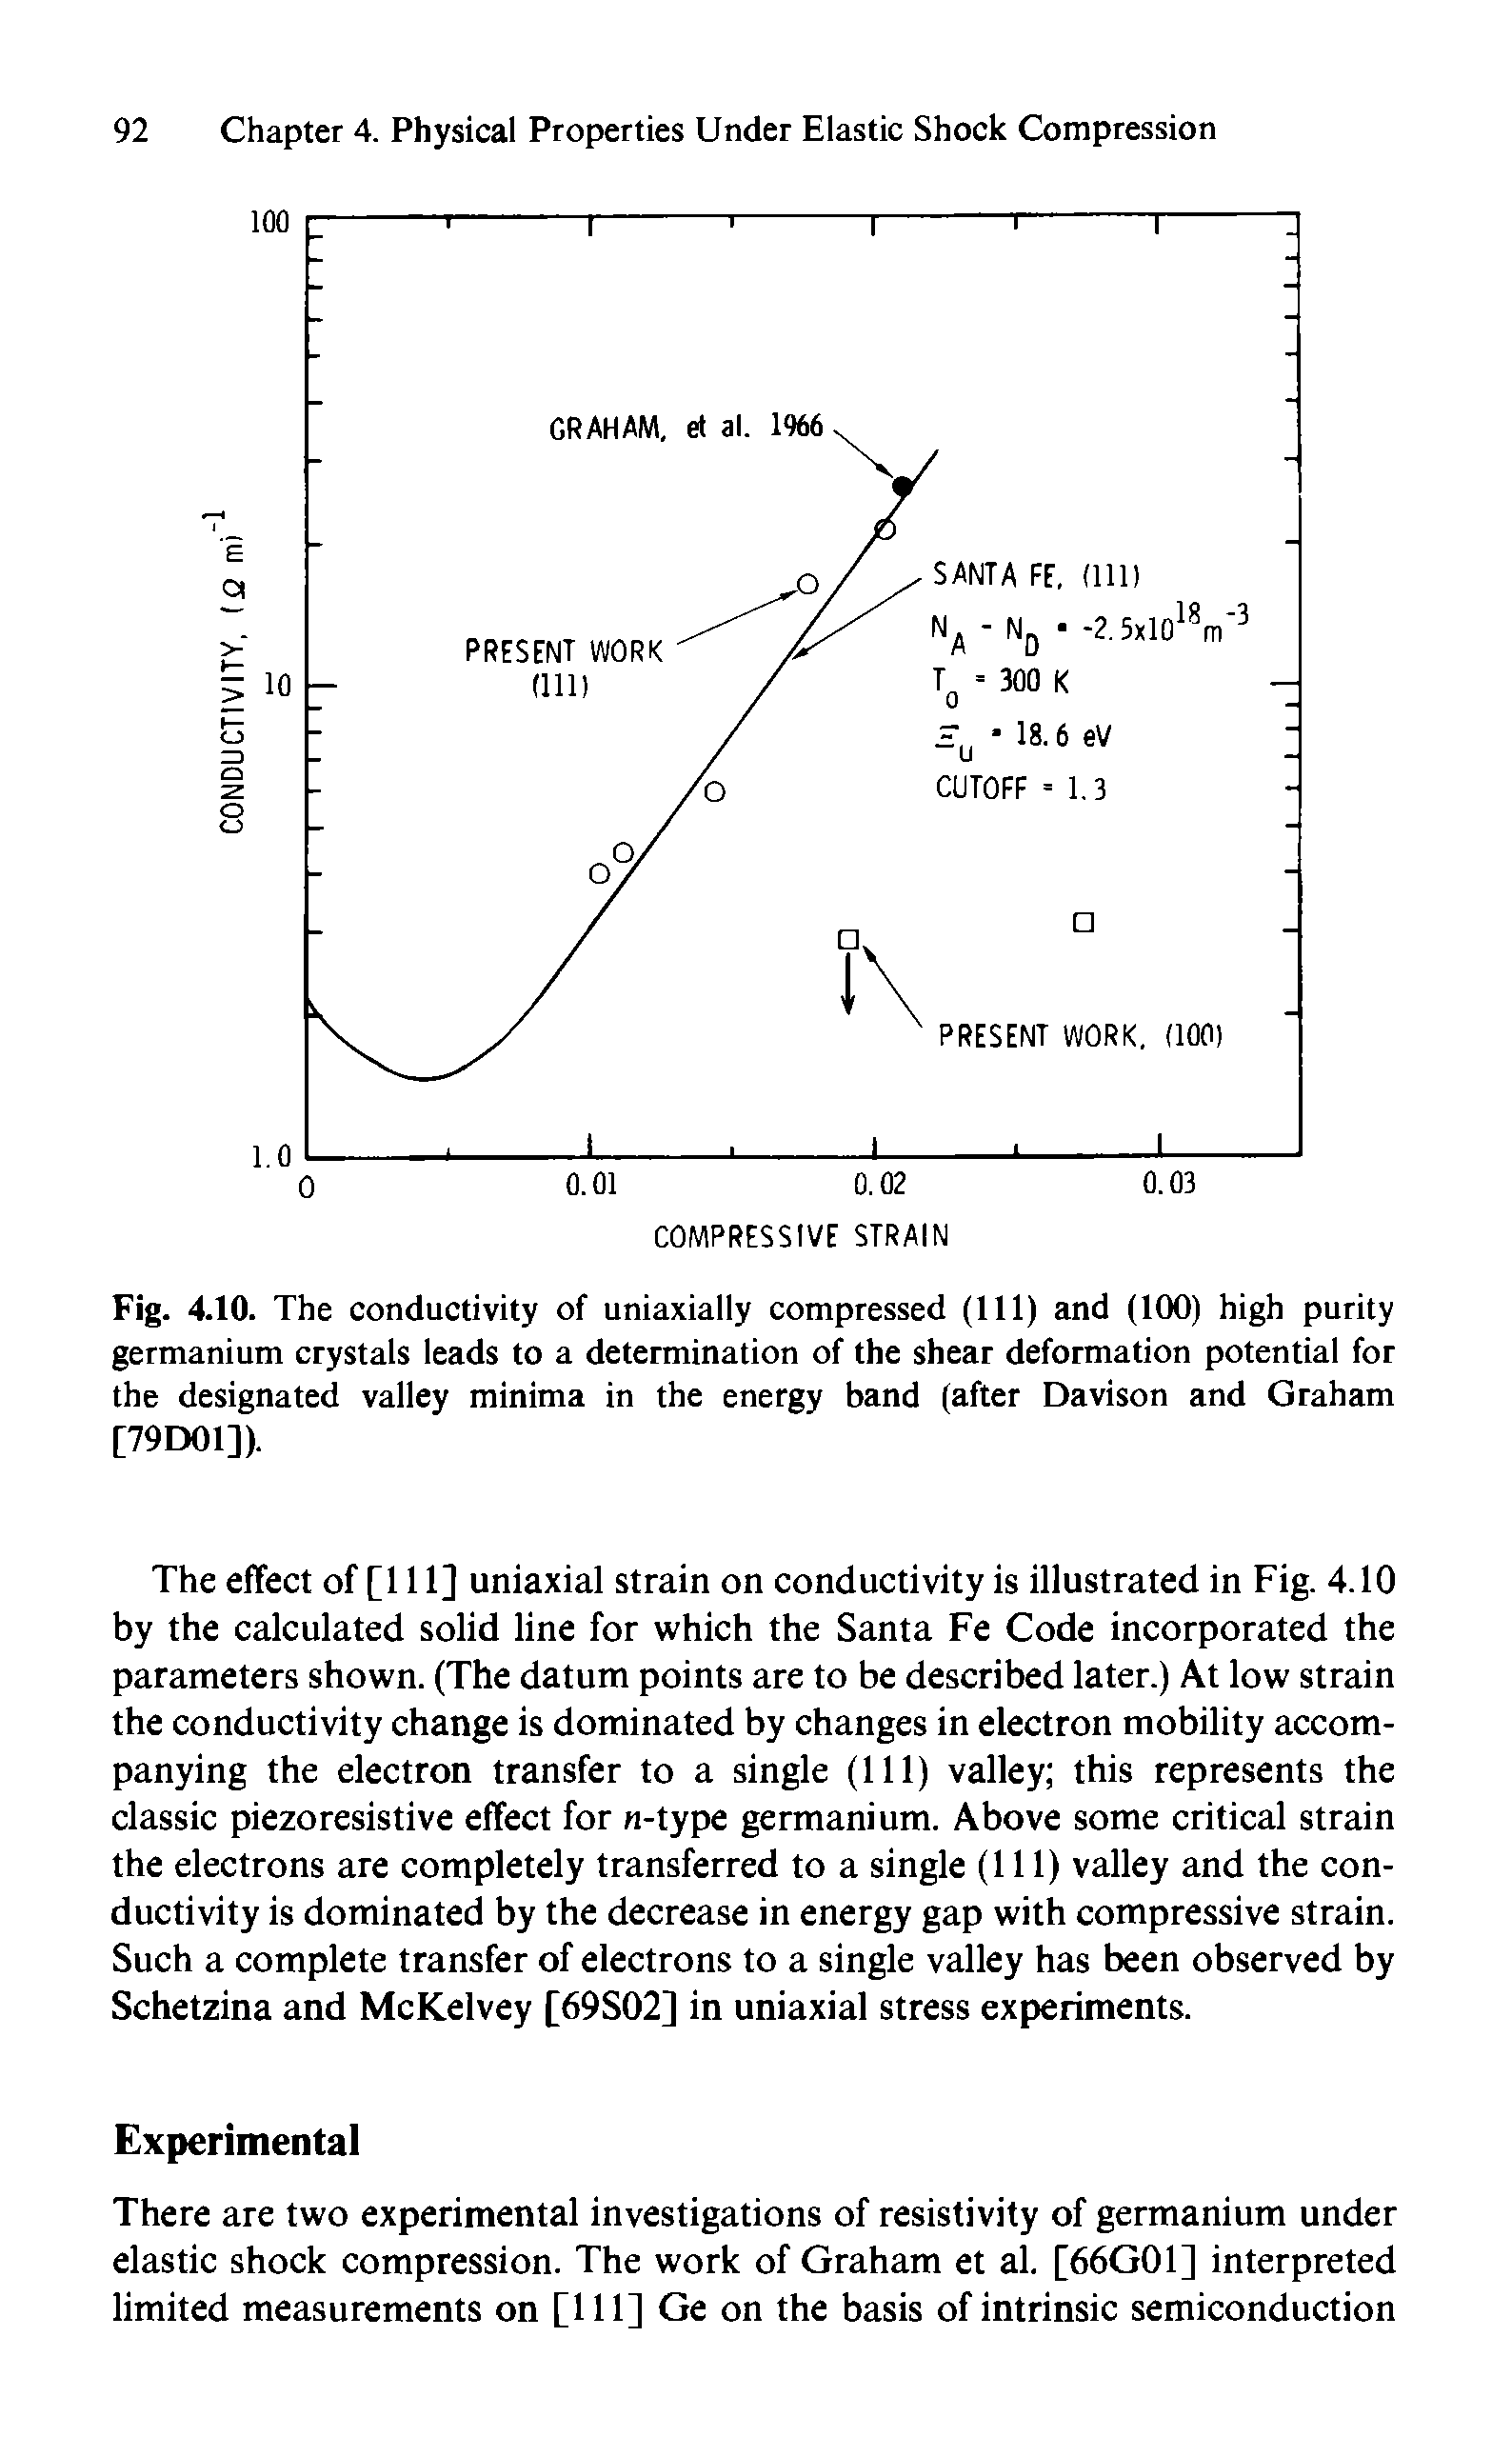 Fig. 4.10. The conductivity of uniaxially compressed (111) and (100) high purity germanium crystals leads to a determination of the shear deformation potential for the designated valley minima in the energy band (after Davison and Graham [79D01]).